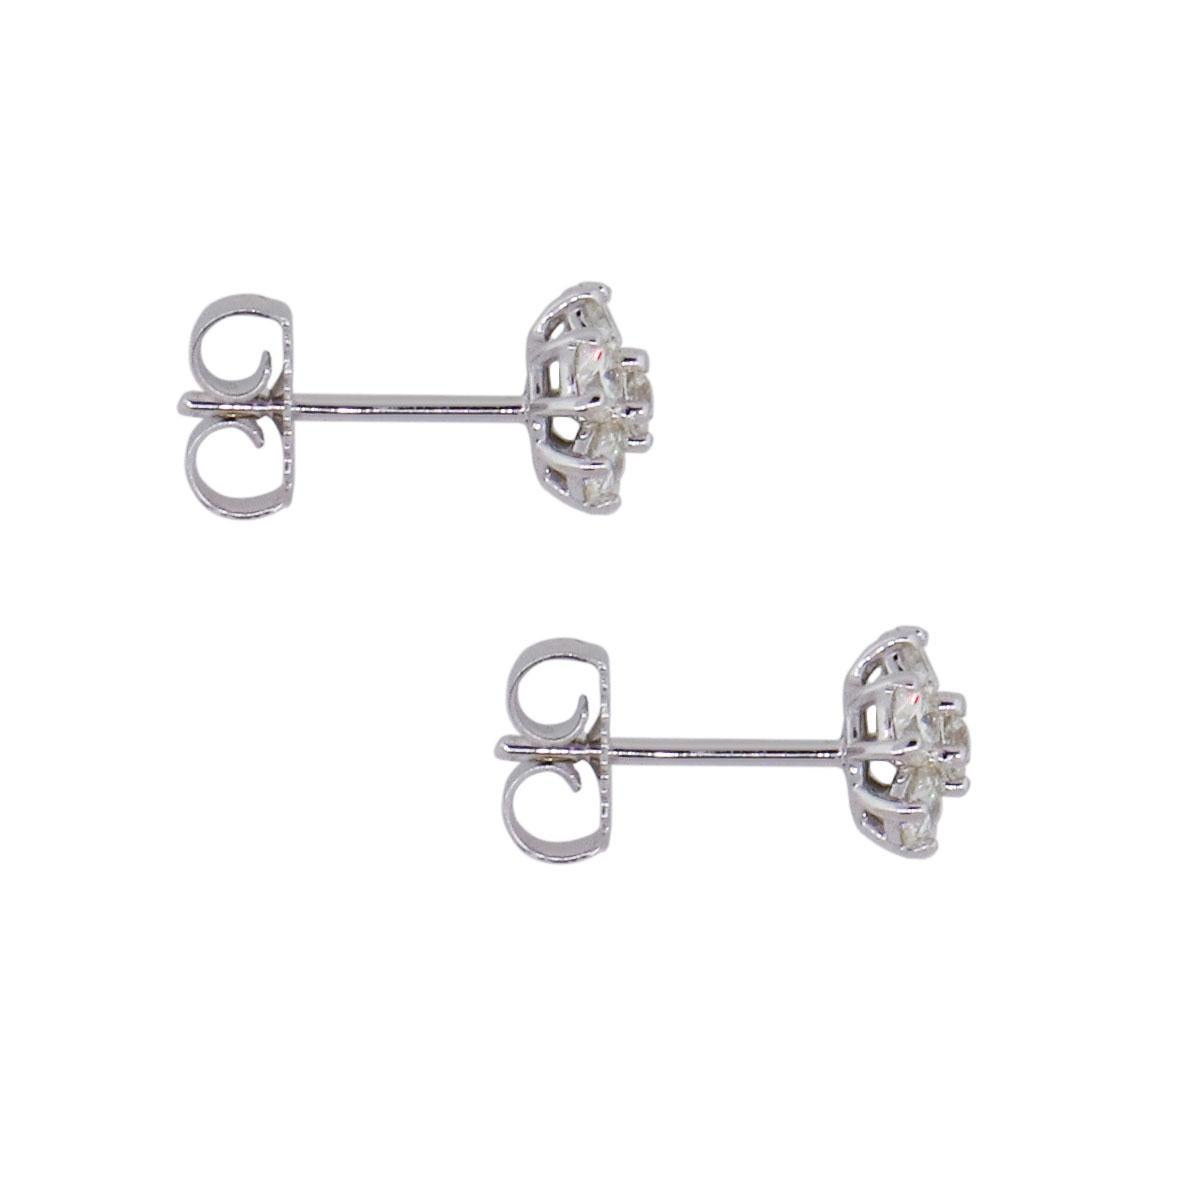 Material: 14k white gold
Diamond Details: Approximately 1.22ctw of round brilliant diamonds. Diamonds are G/H in color and VS in clarity
Earring Measurements: 0.63″ x 0.30″ x 0.30″
Total Weight: 1.7g (1.1dwt)
Earring backs: Post friction
Additional